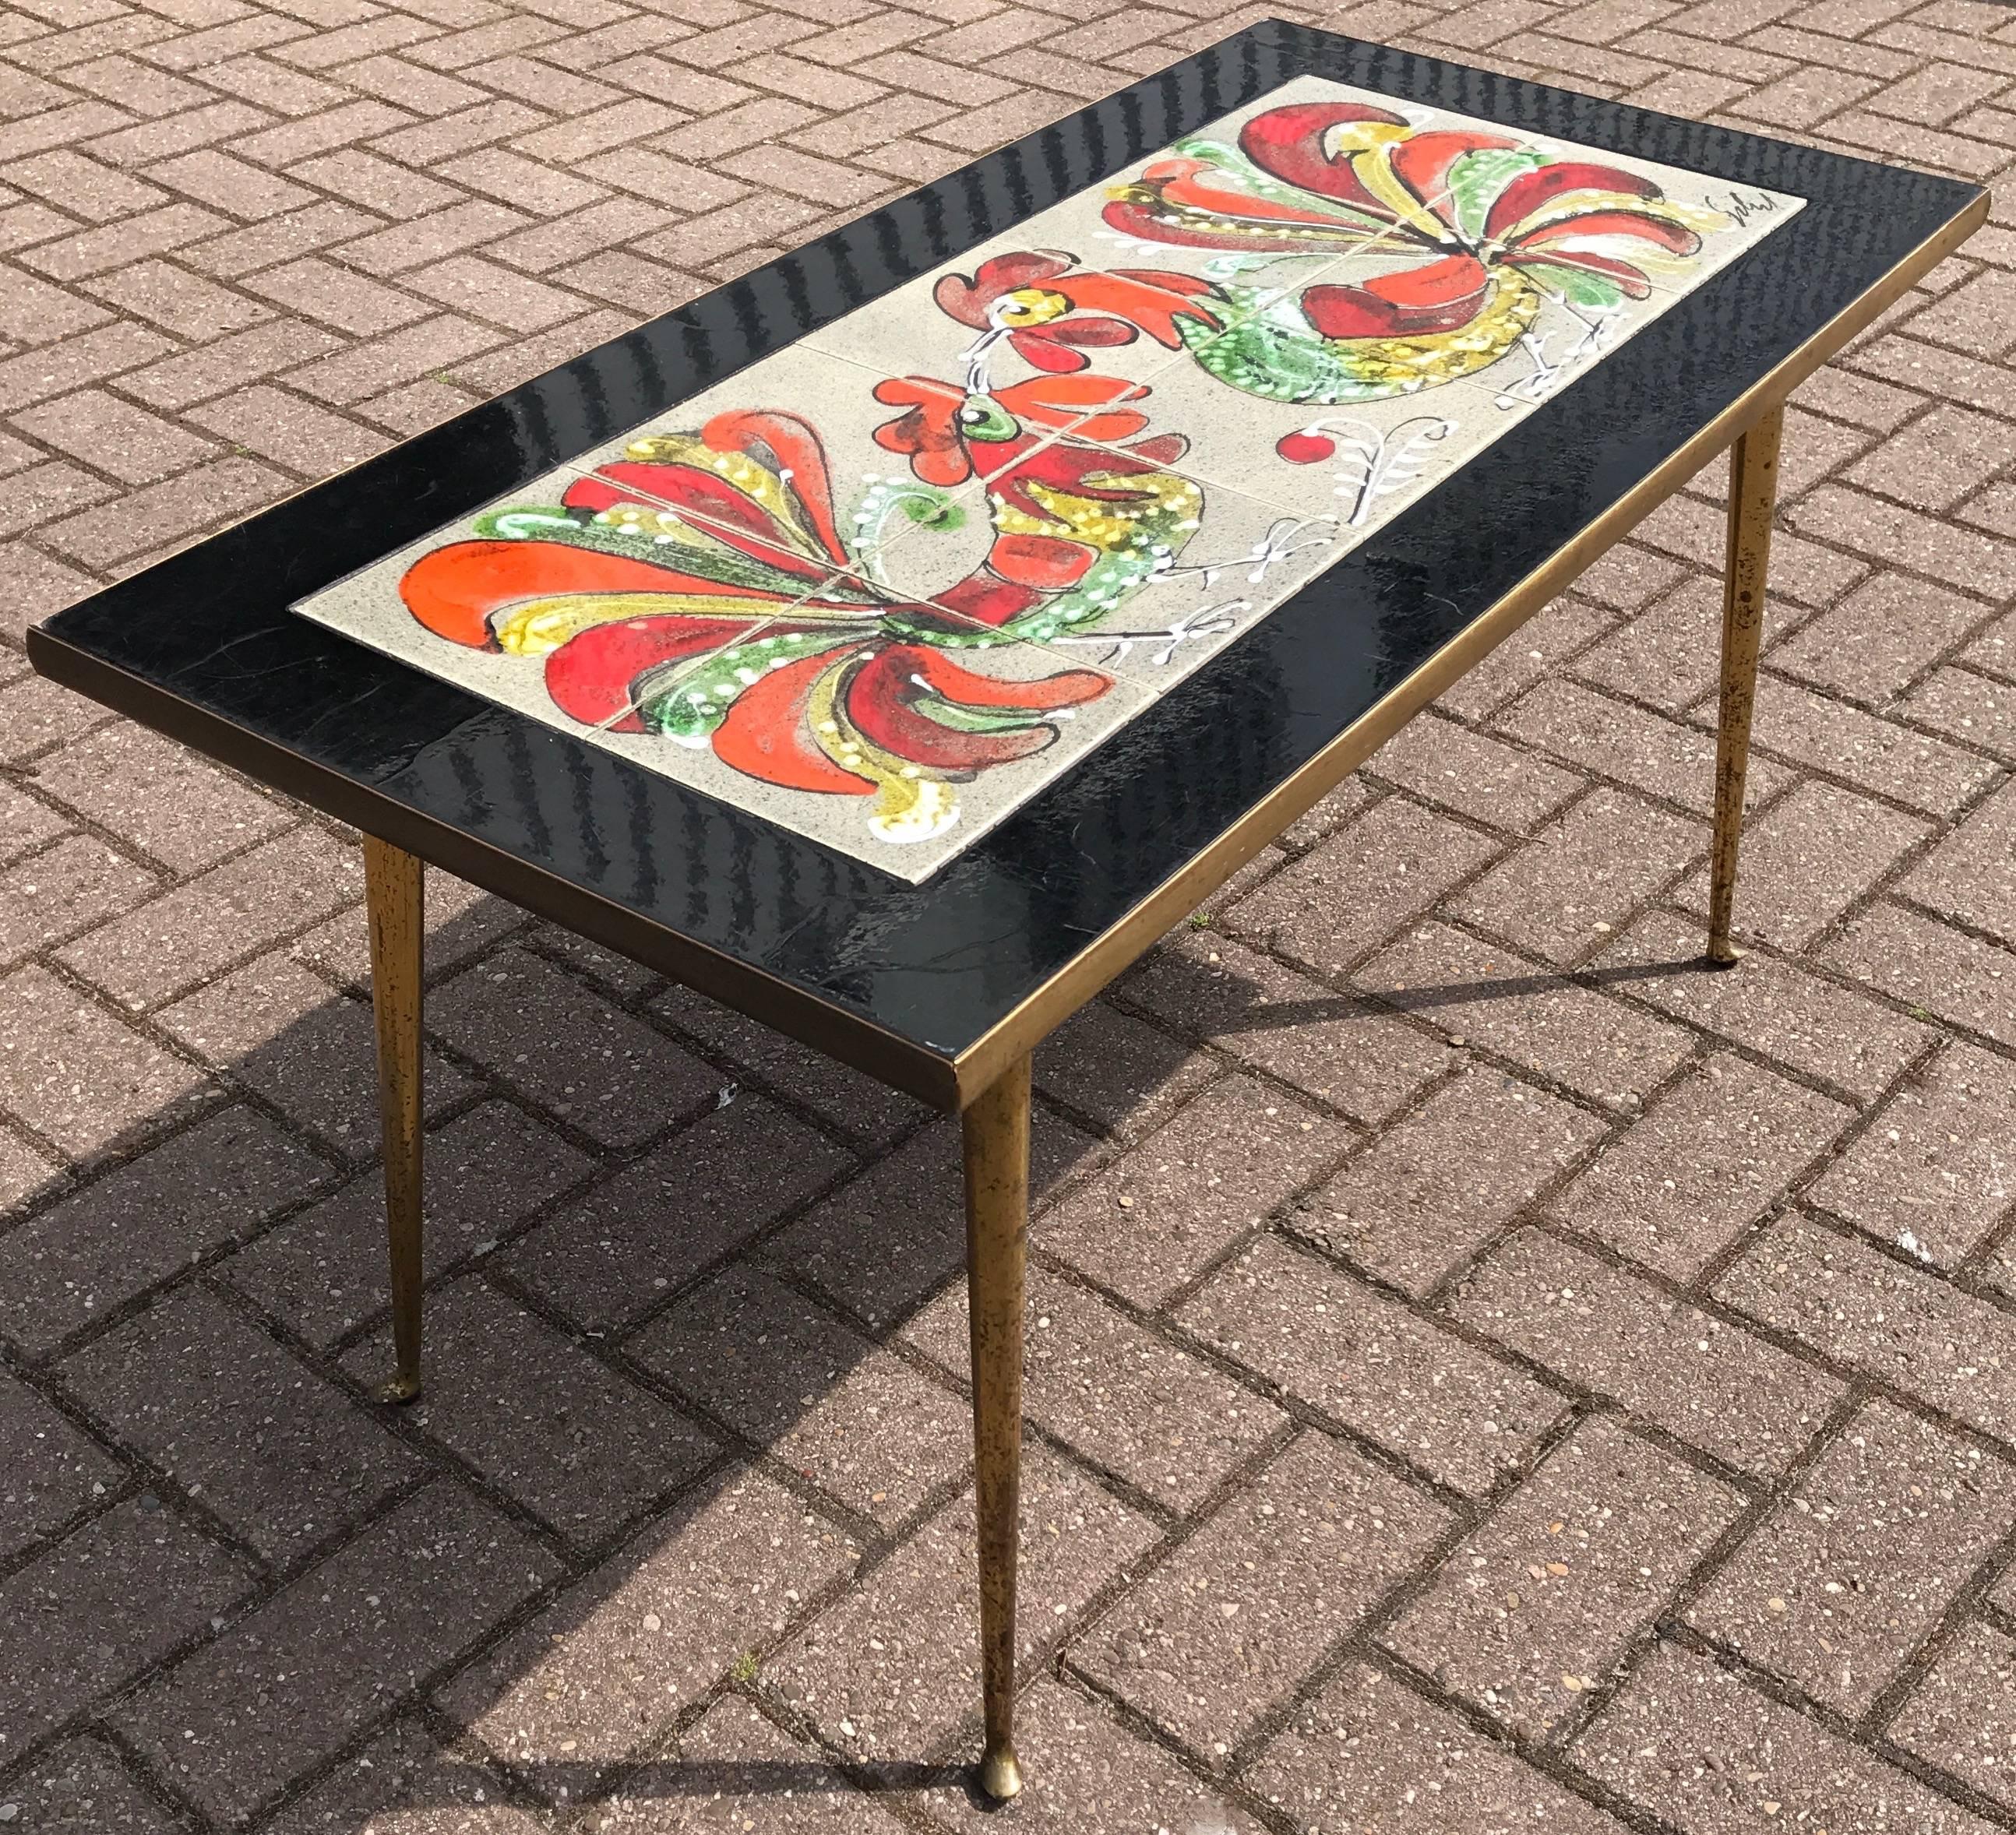 20th Century Rare Italian Brass & Tile Coffee or Cocktail Table with Hand-Painted Cock fight